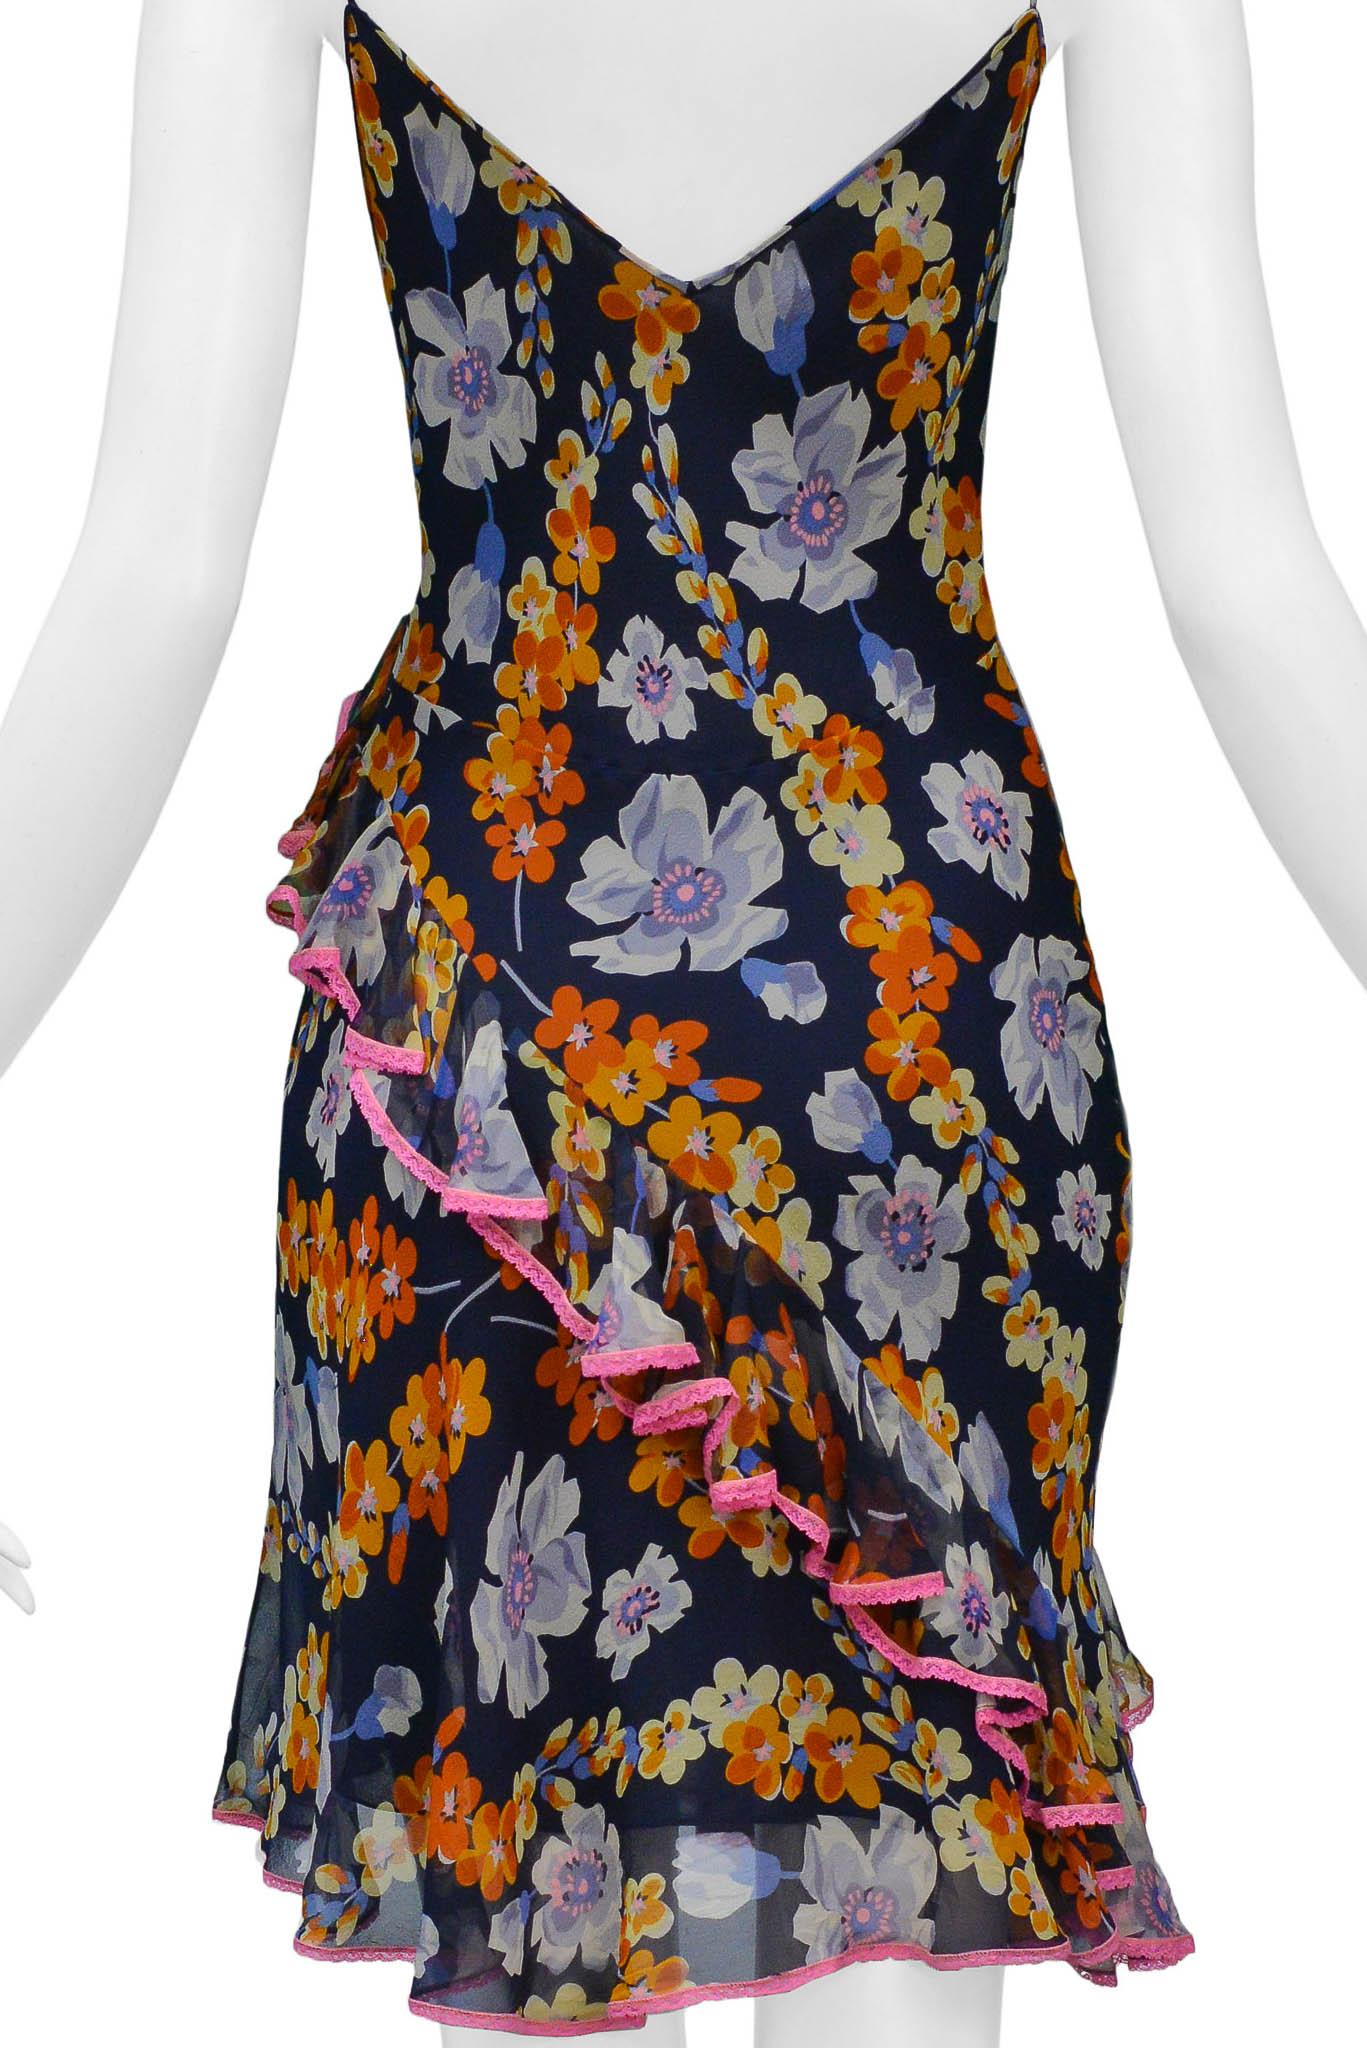 Women's John Galliano Navy Slip Dress With Floral Pattern & Pink Lace Trim For Sale